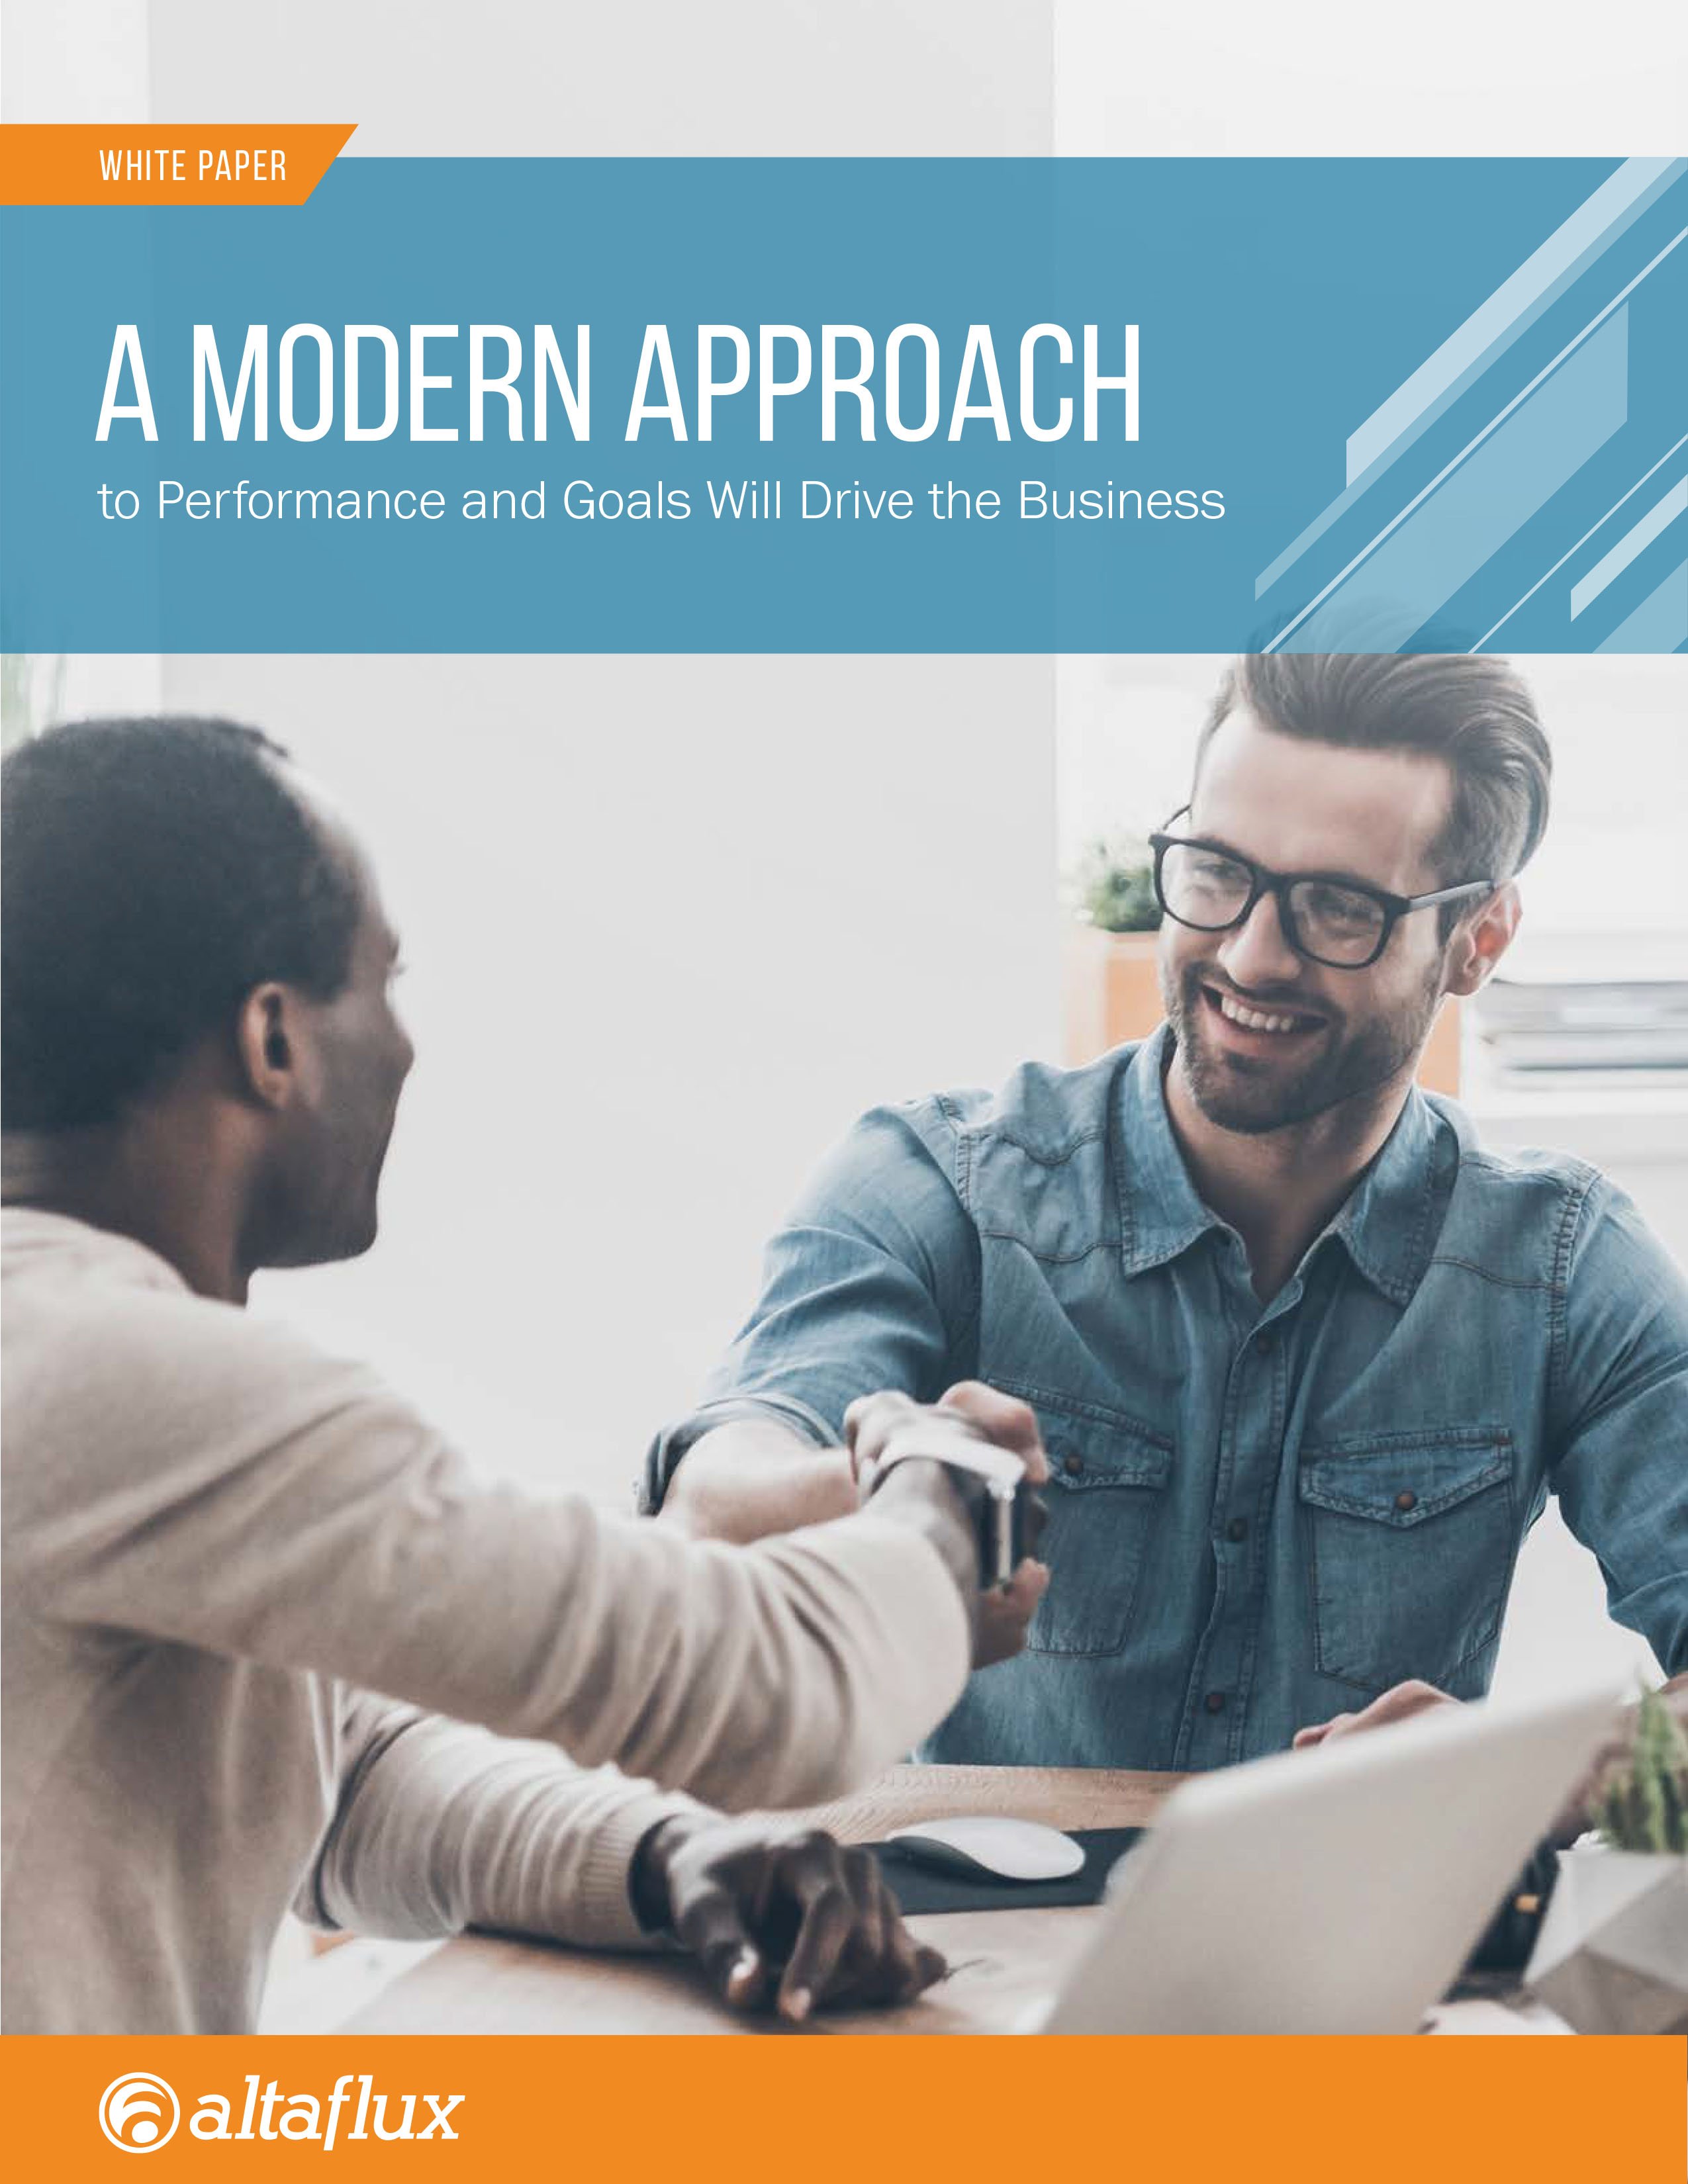 A Modern Approach To Performance and Goals